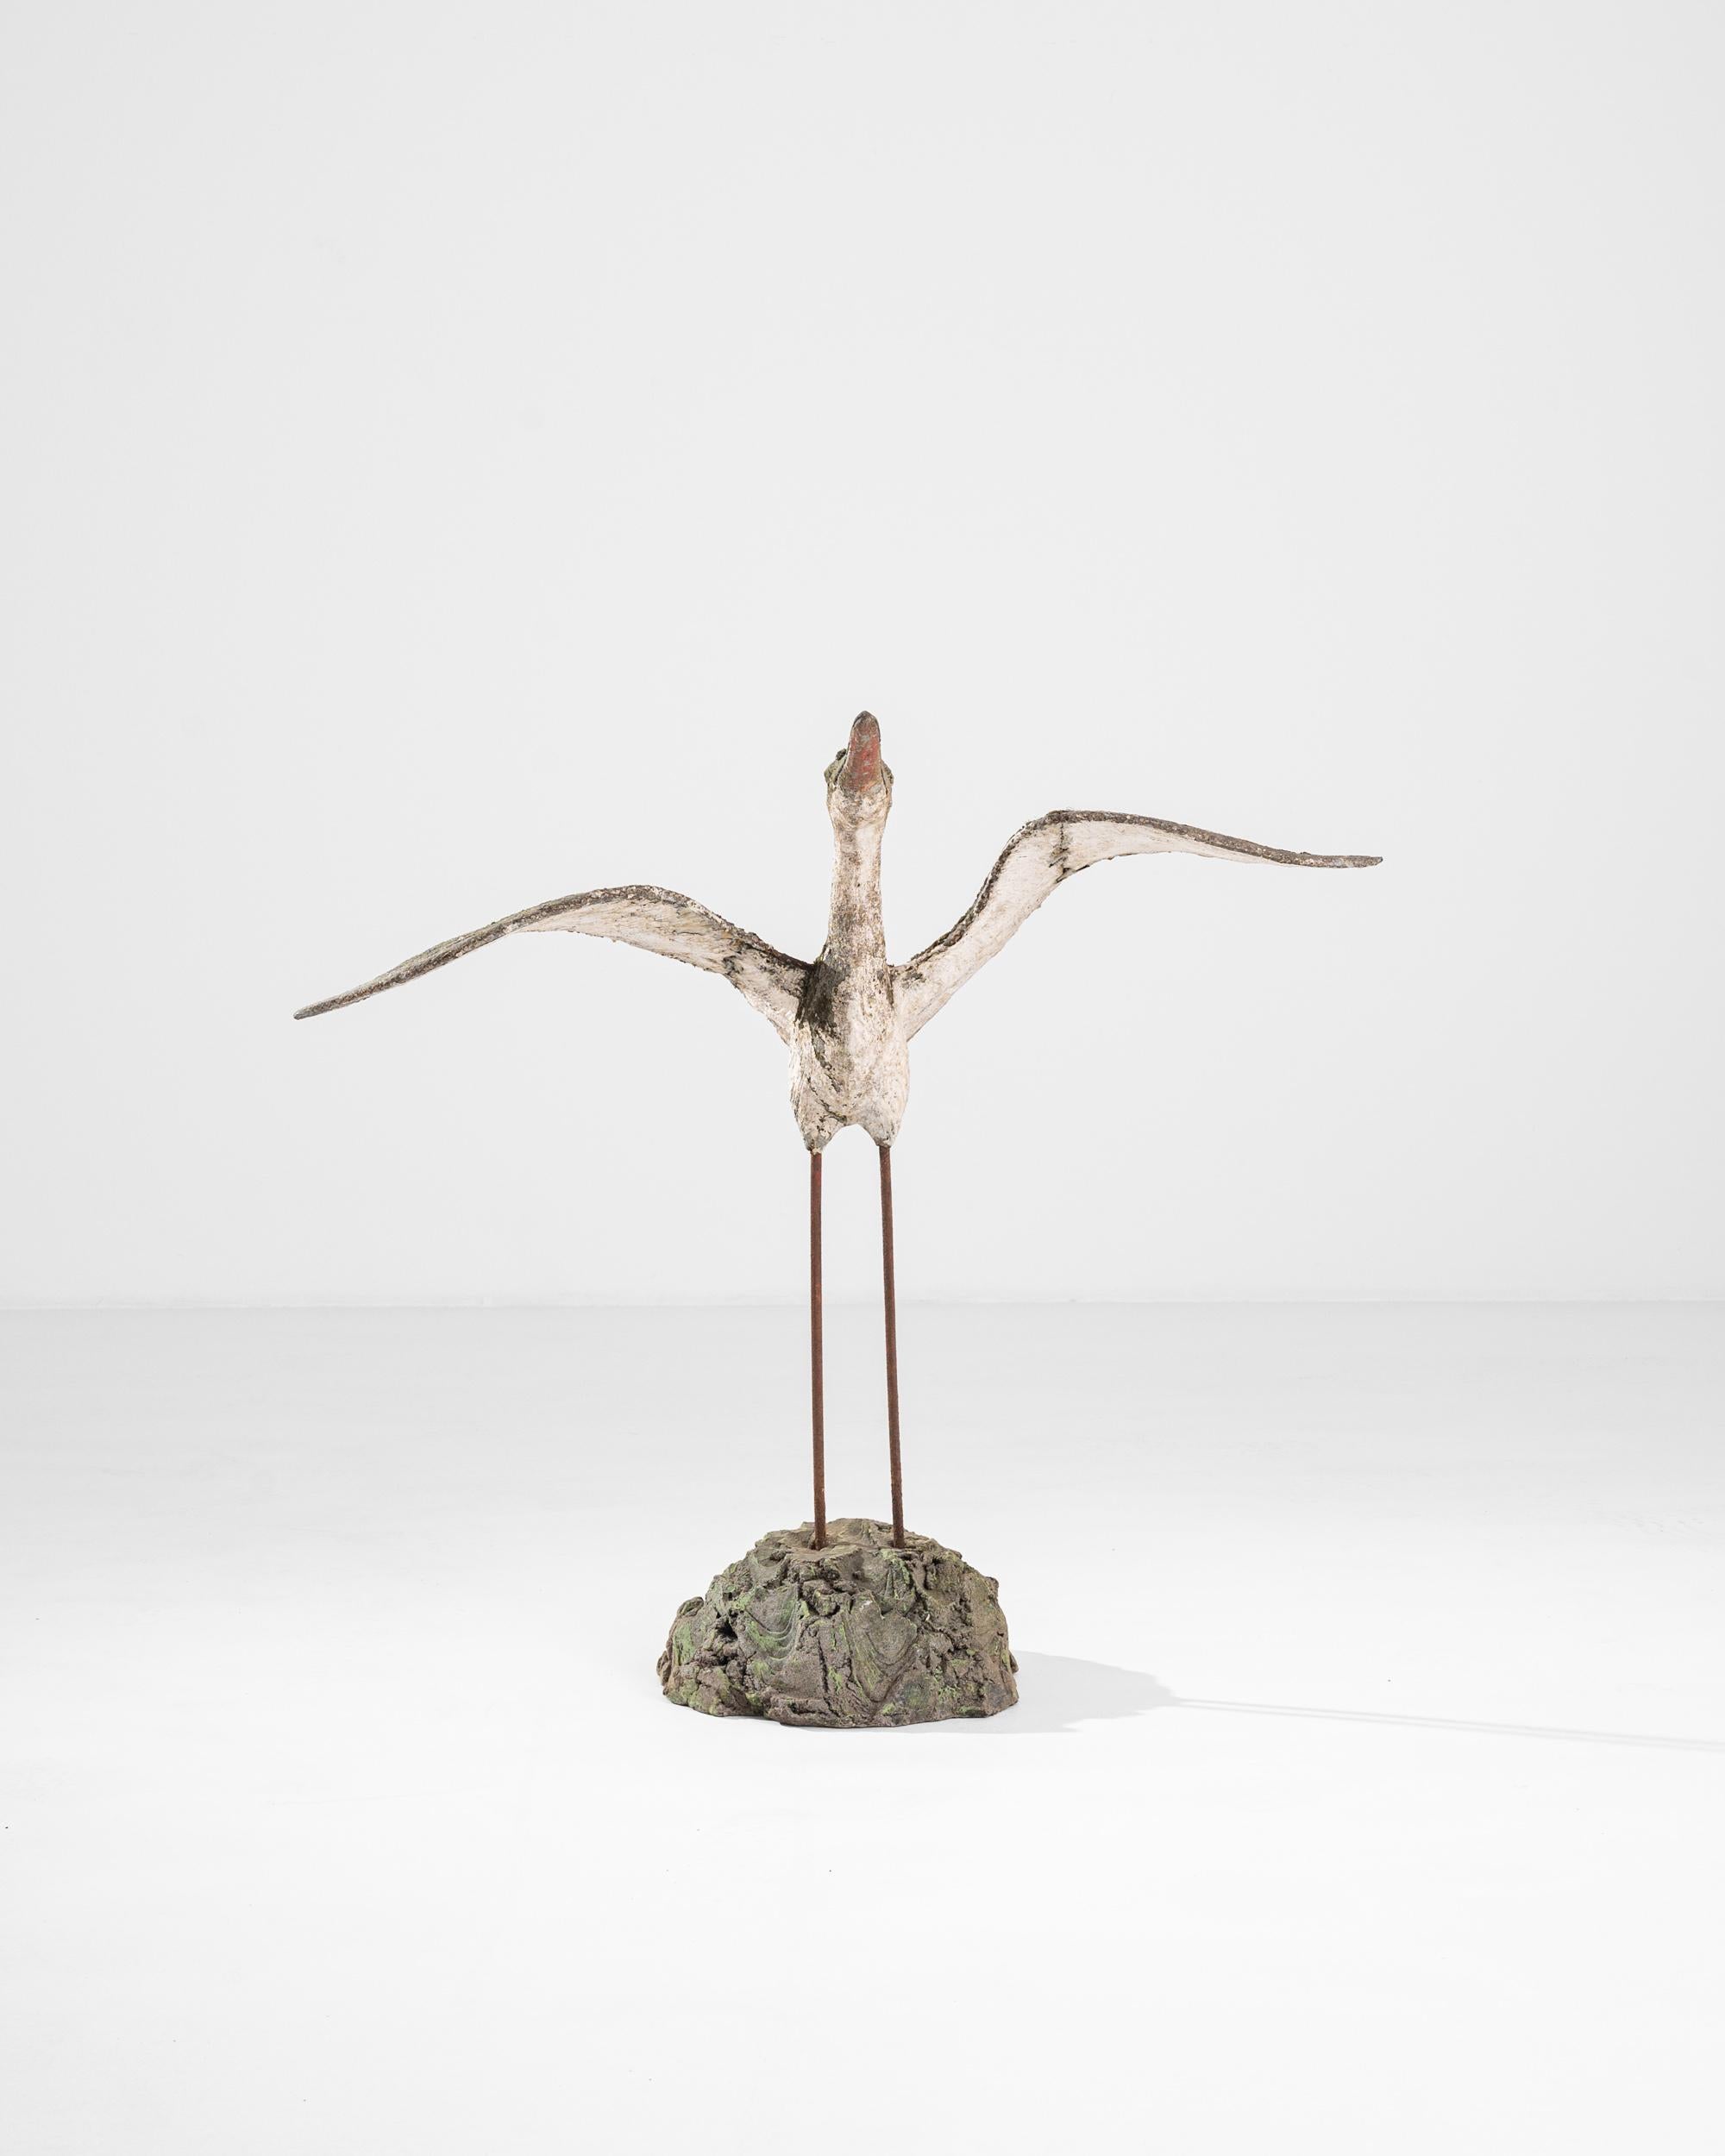 This vintage concrete sculpture depicts a heron, captured in the moment, about to take flight — neck extended, beak lifted, wings raised. Made in France in the 1950s, the weathered finish of the concrete gives this piece a unique appeal. The colors